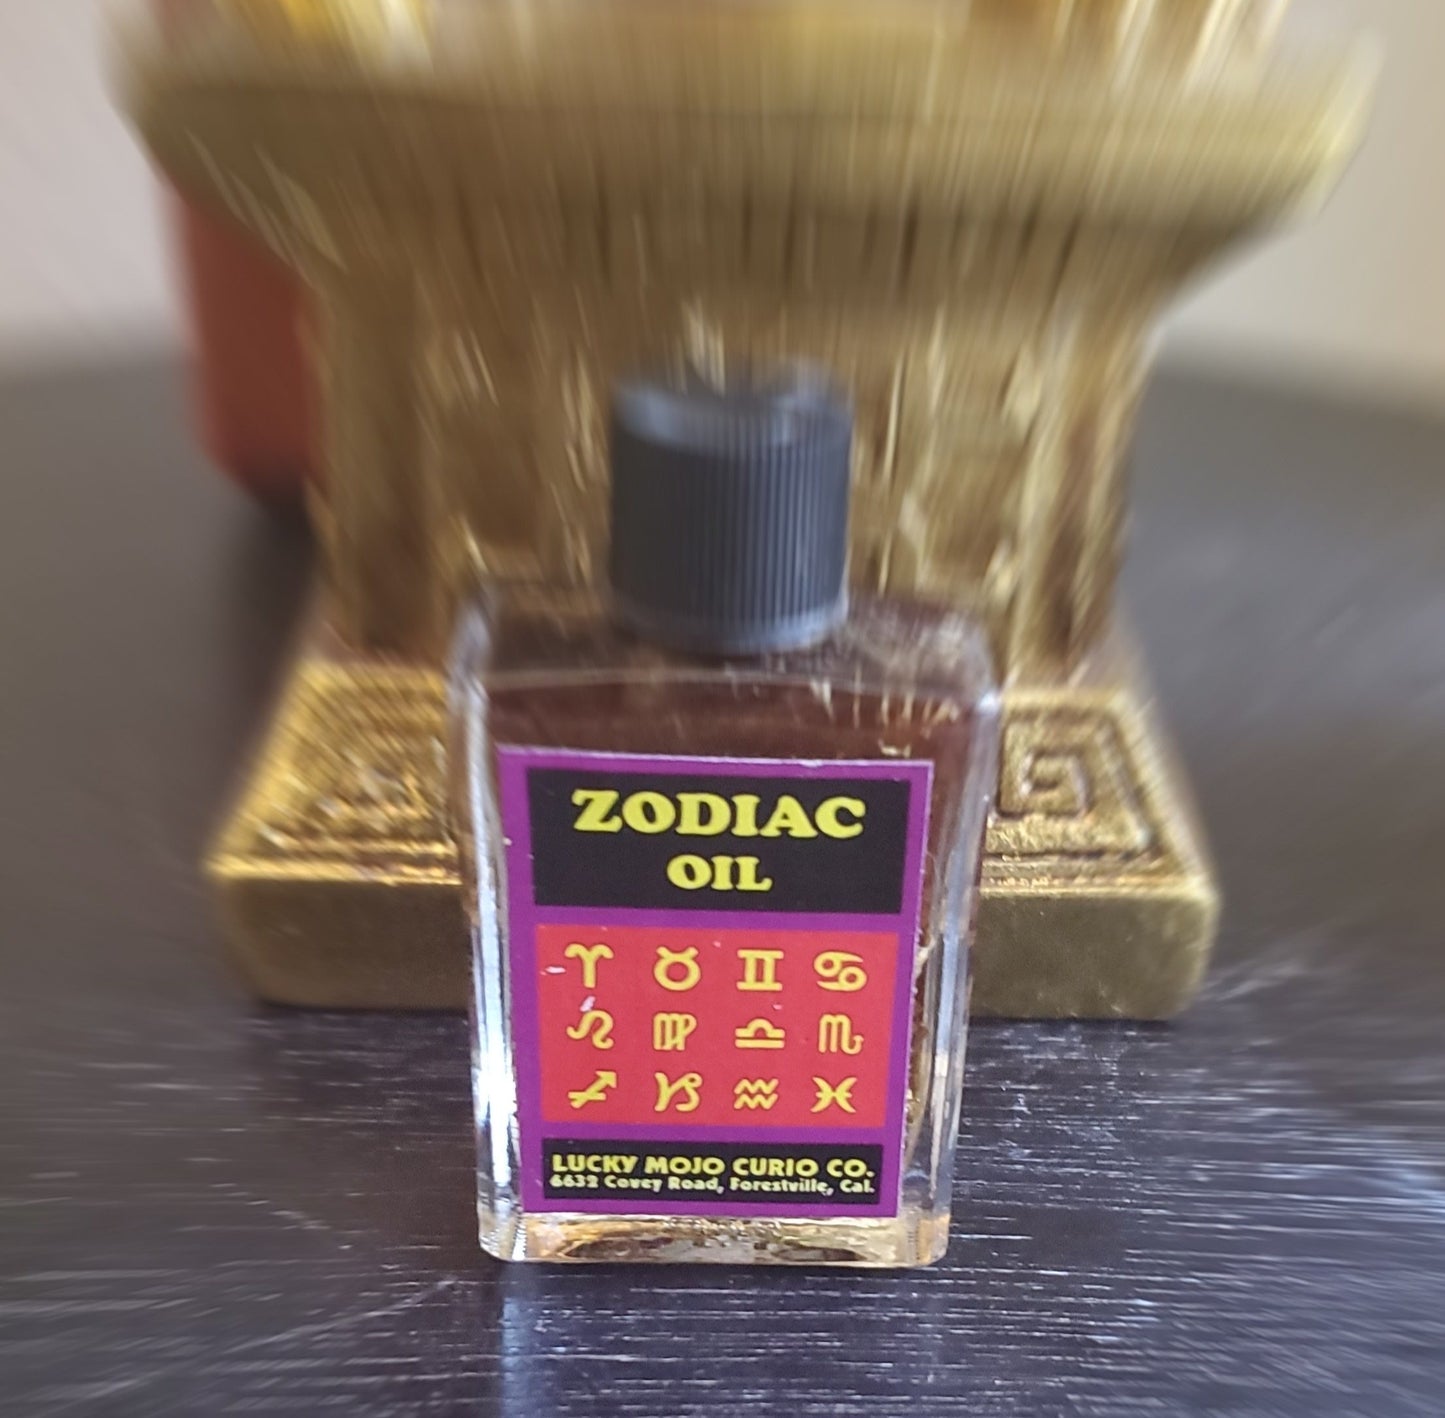 LuckyMojoCurioCo "Zodiac Oil" Anointing / Conjure Oil #GreatDeal #LuckyMojoCurioCo #LuckyMojo #EffectiveOils #MustHave